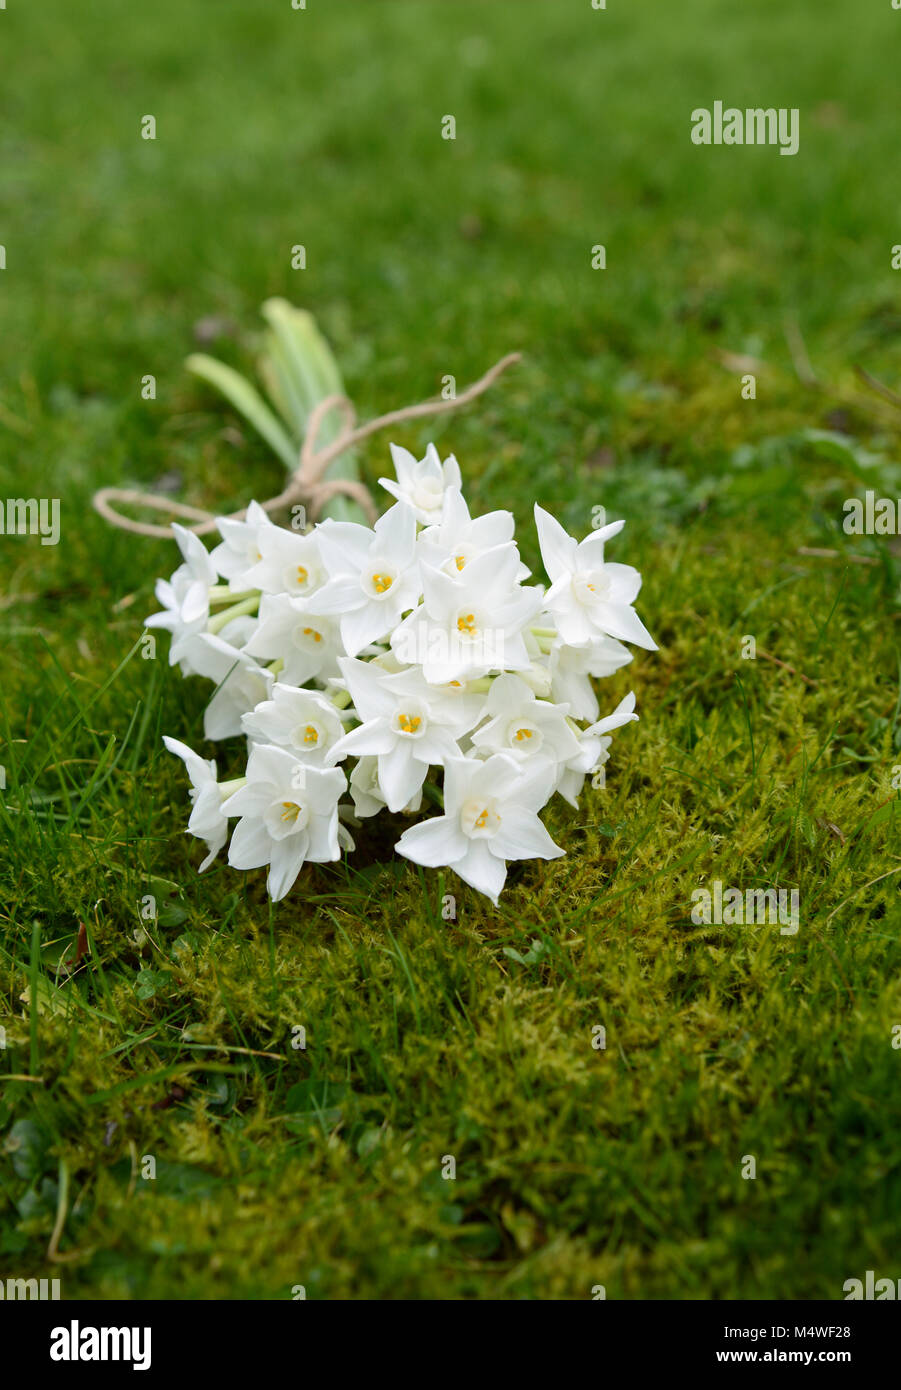 Spring bunch of white narcissus blooms, lying on lush grass and moss Stock Photo